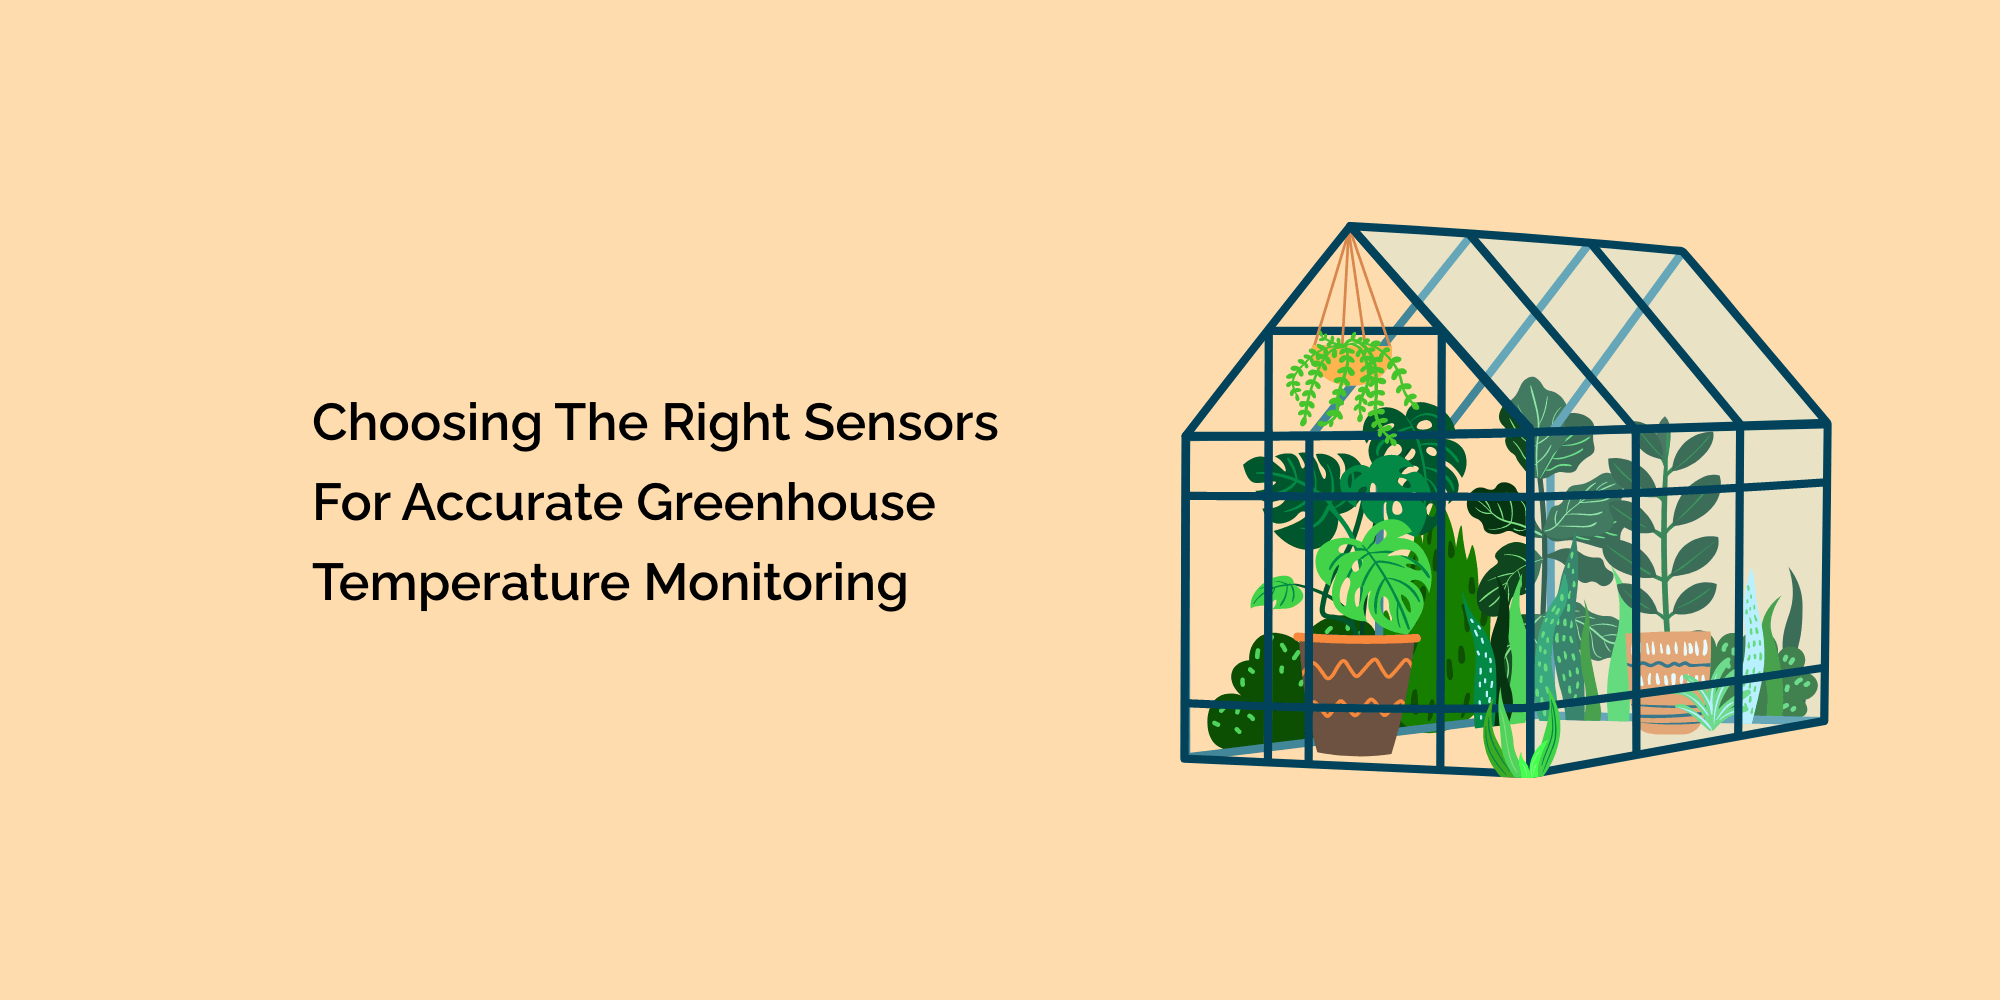 Choosing the Right Sensors for Accurate Greenhouse Temperature Monitoring